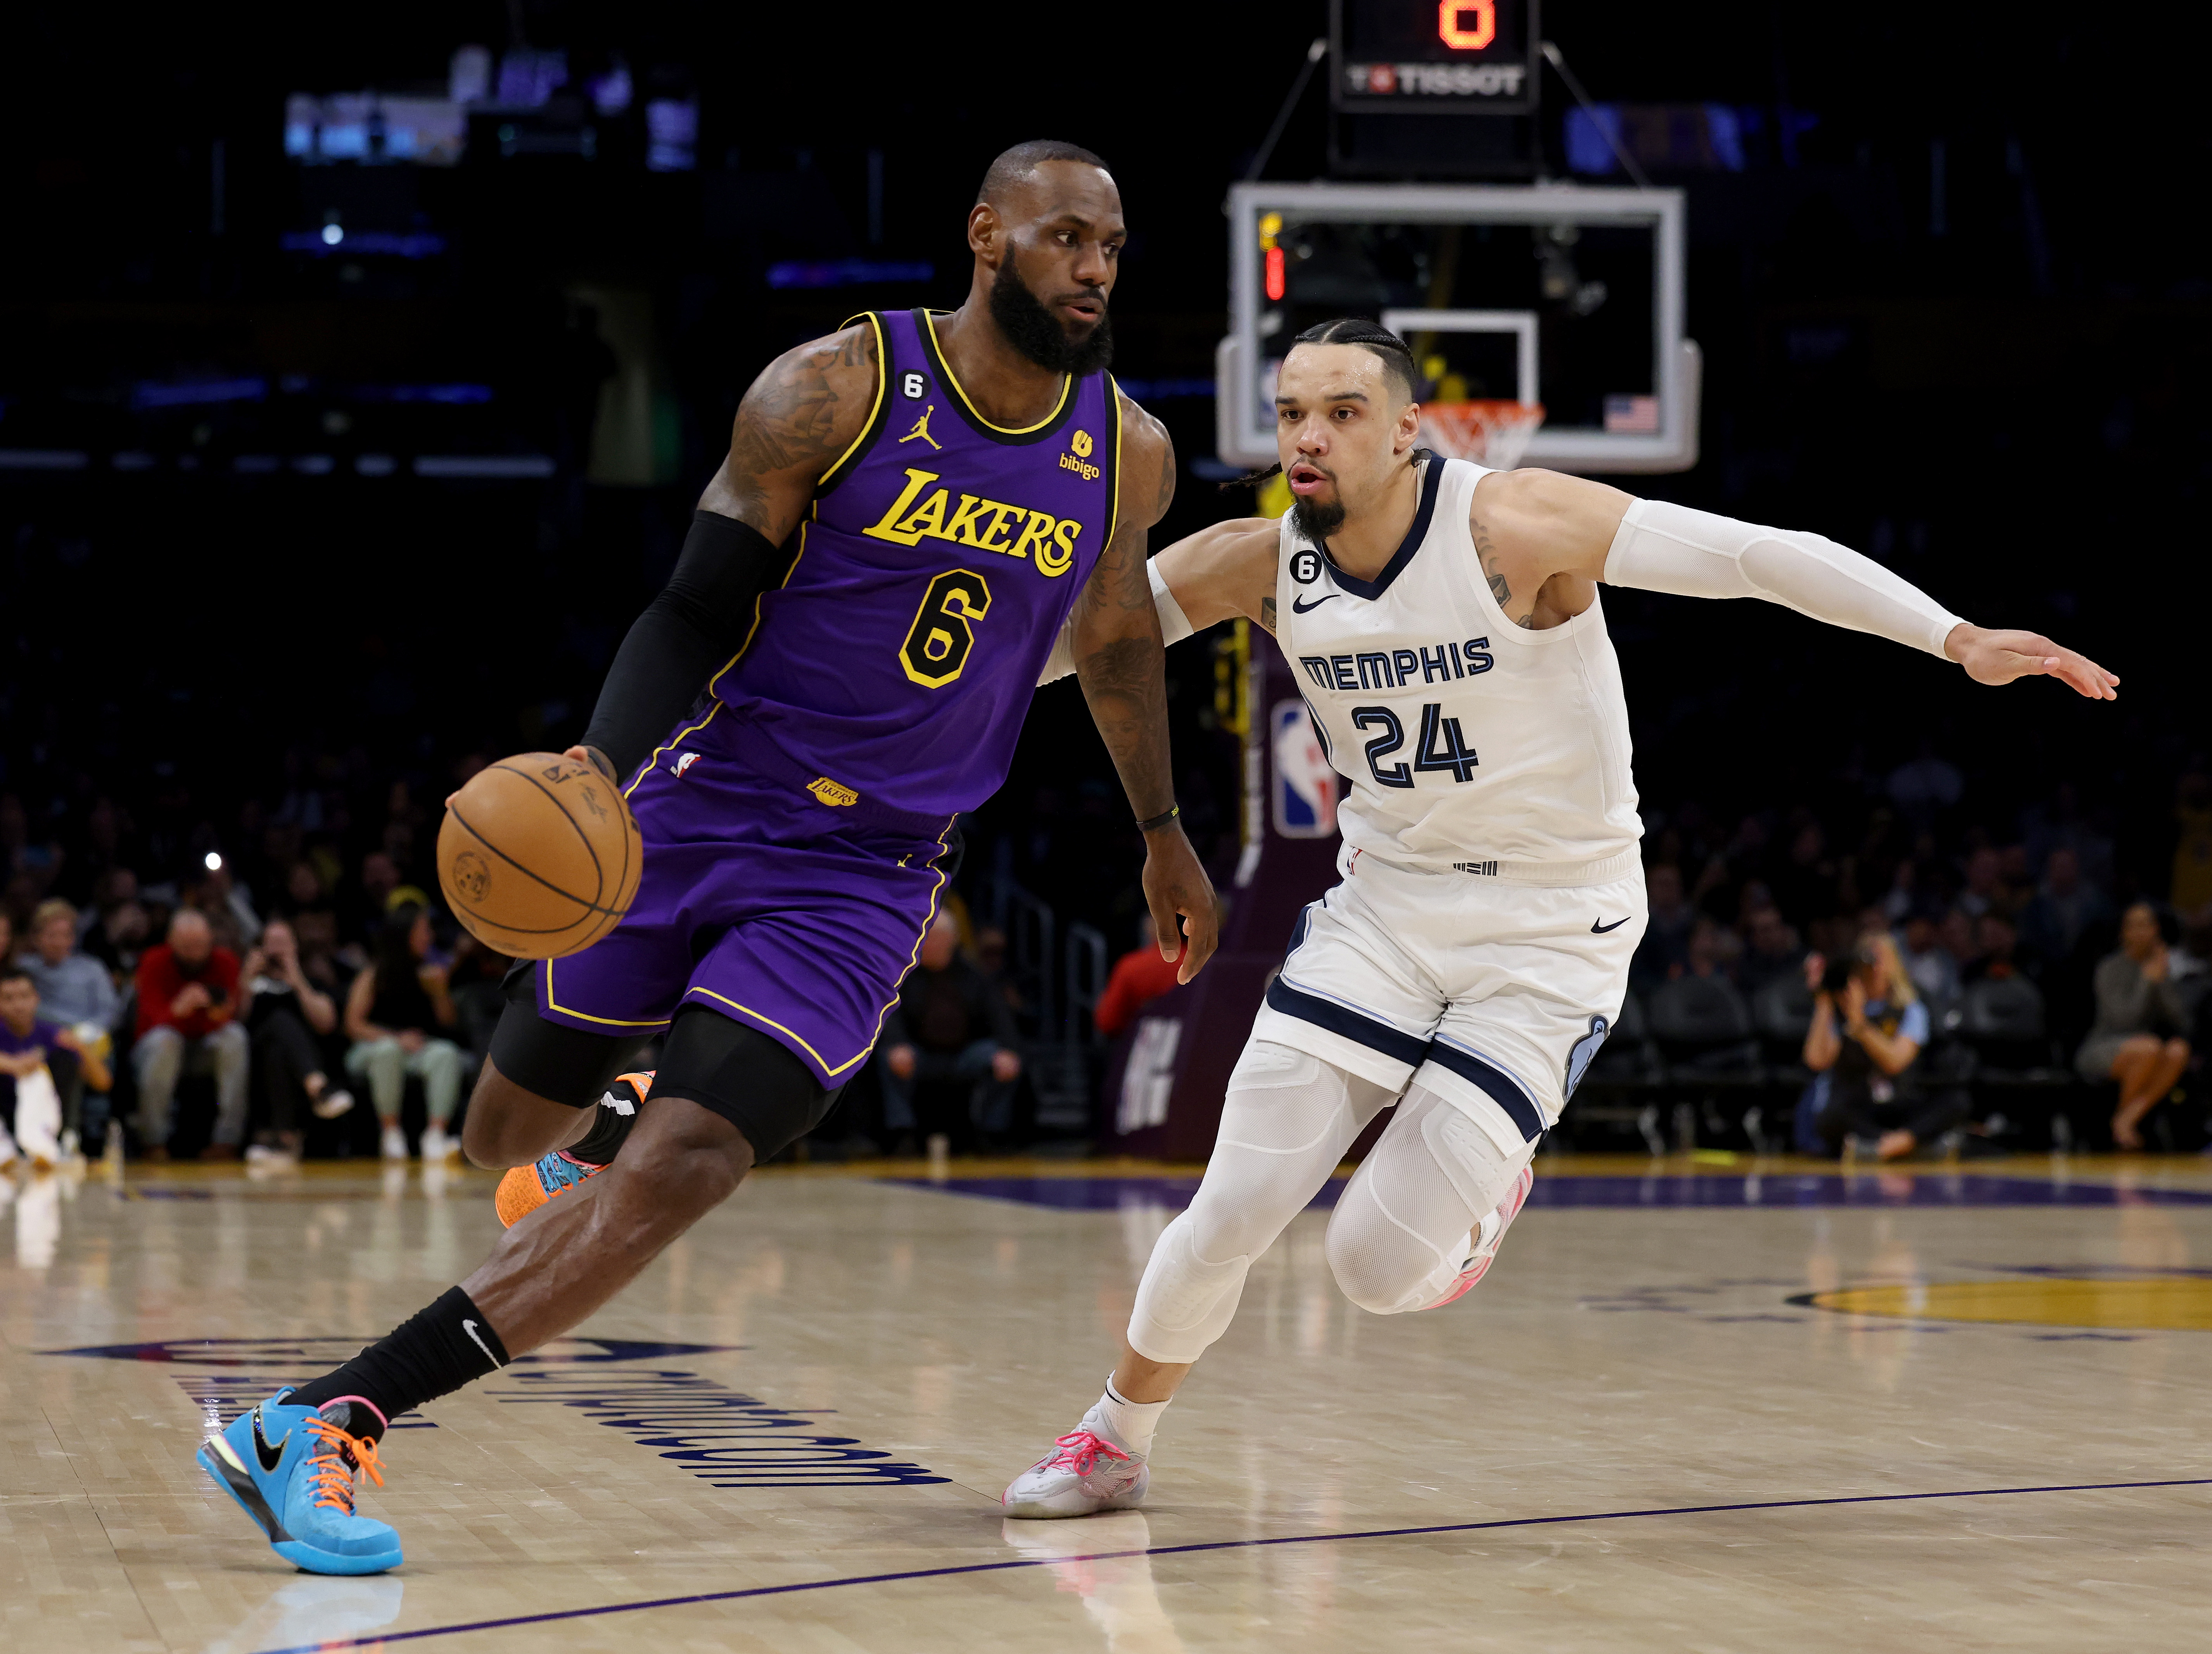 NBA: Lakers rally to end Grizzlies' 11-game winning streak